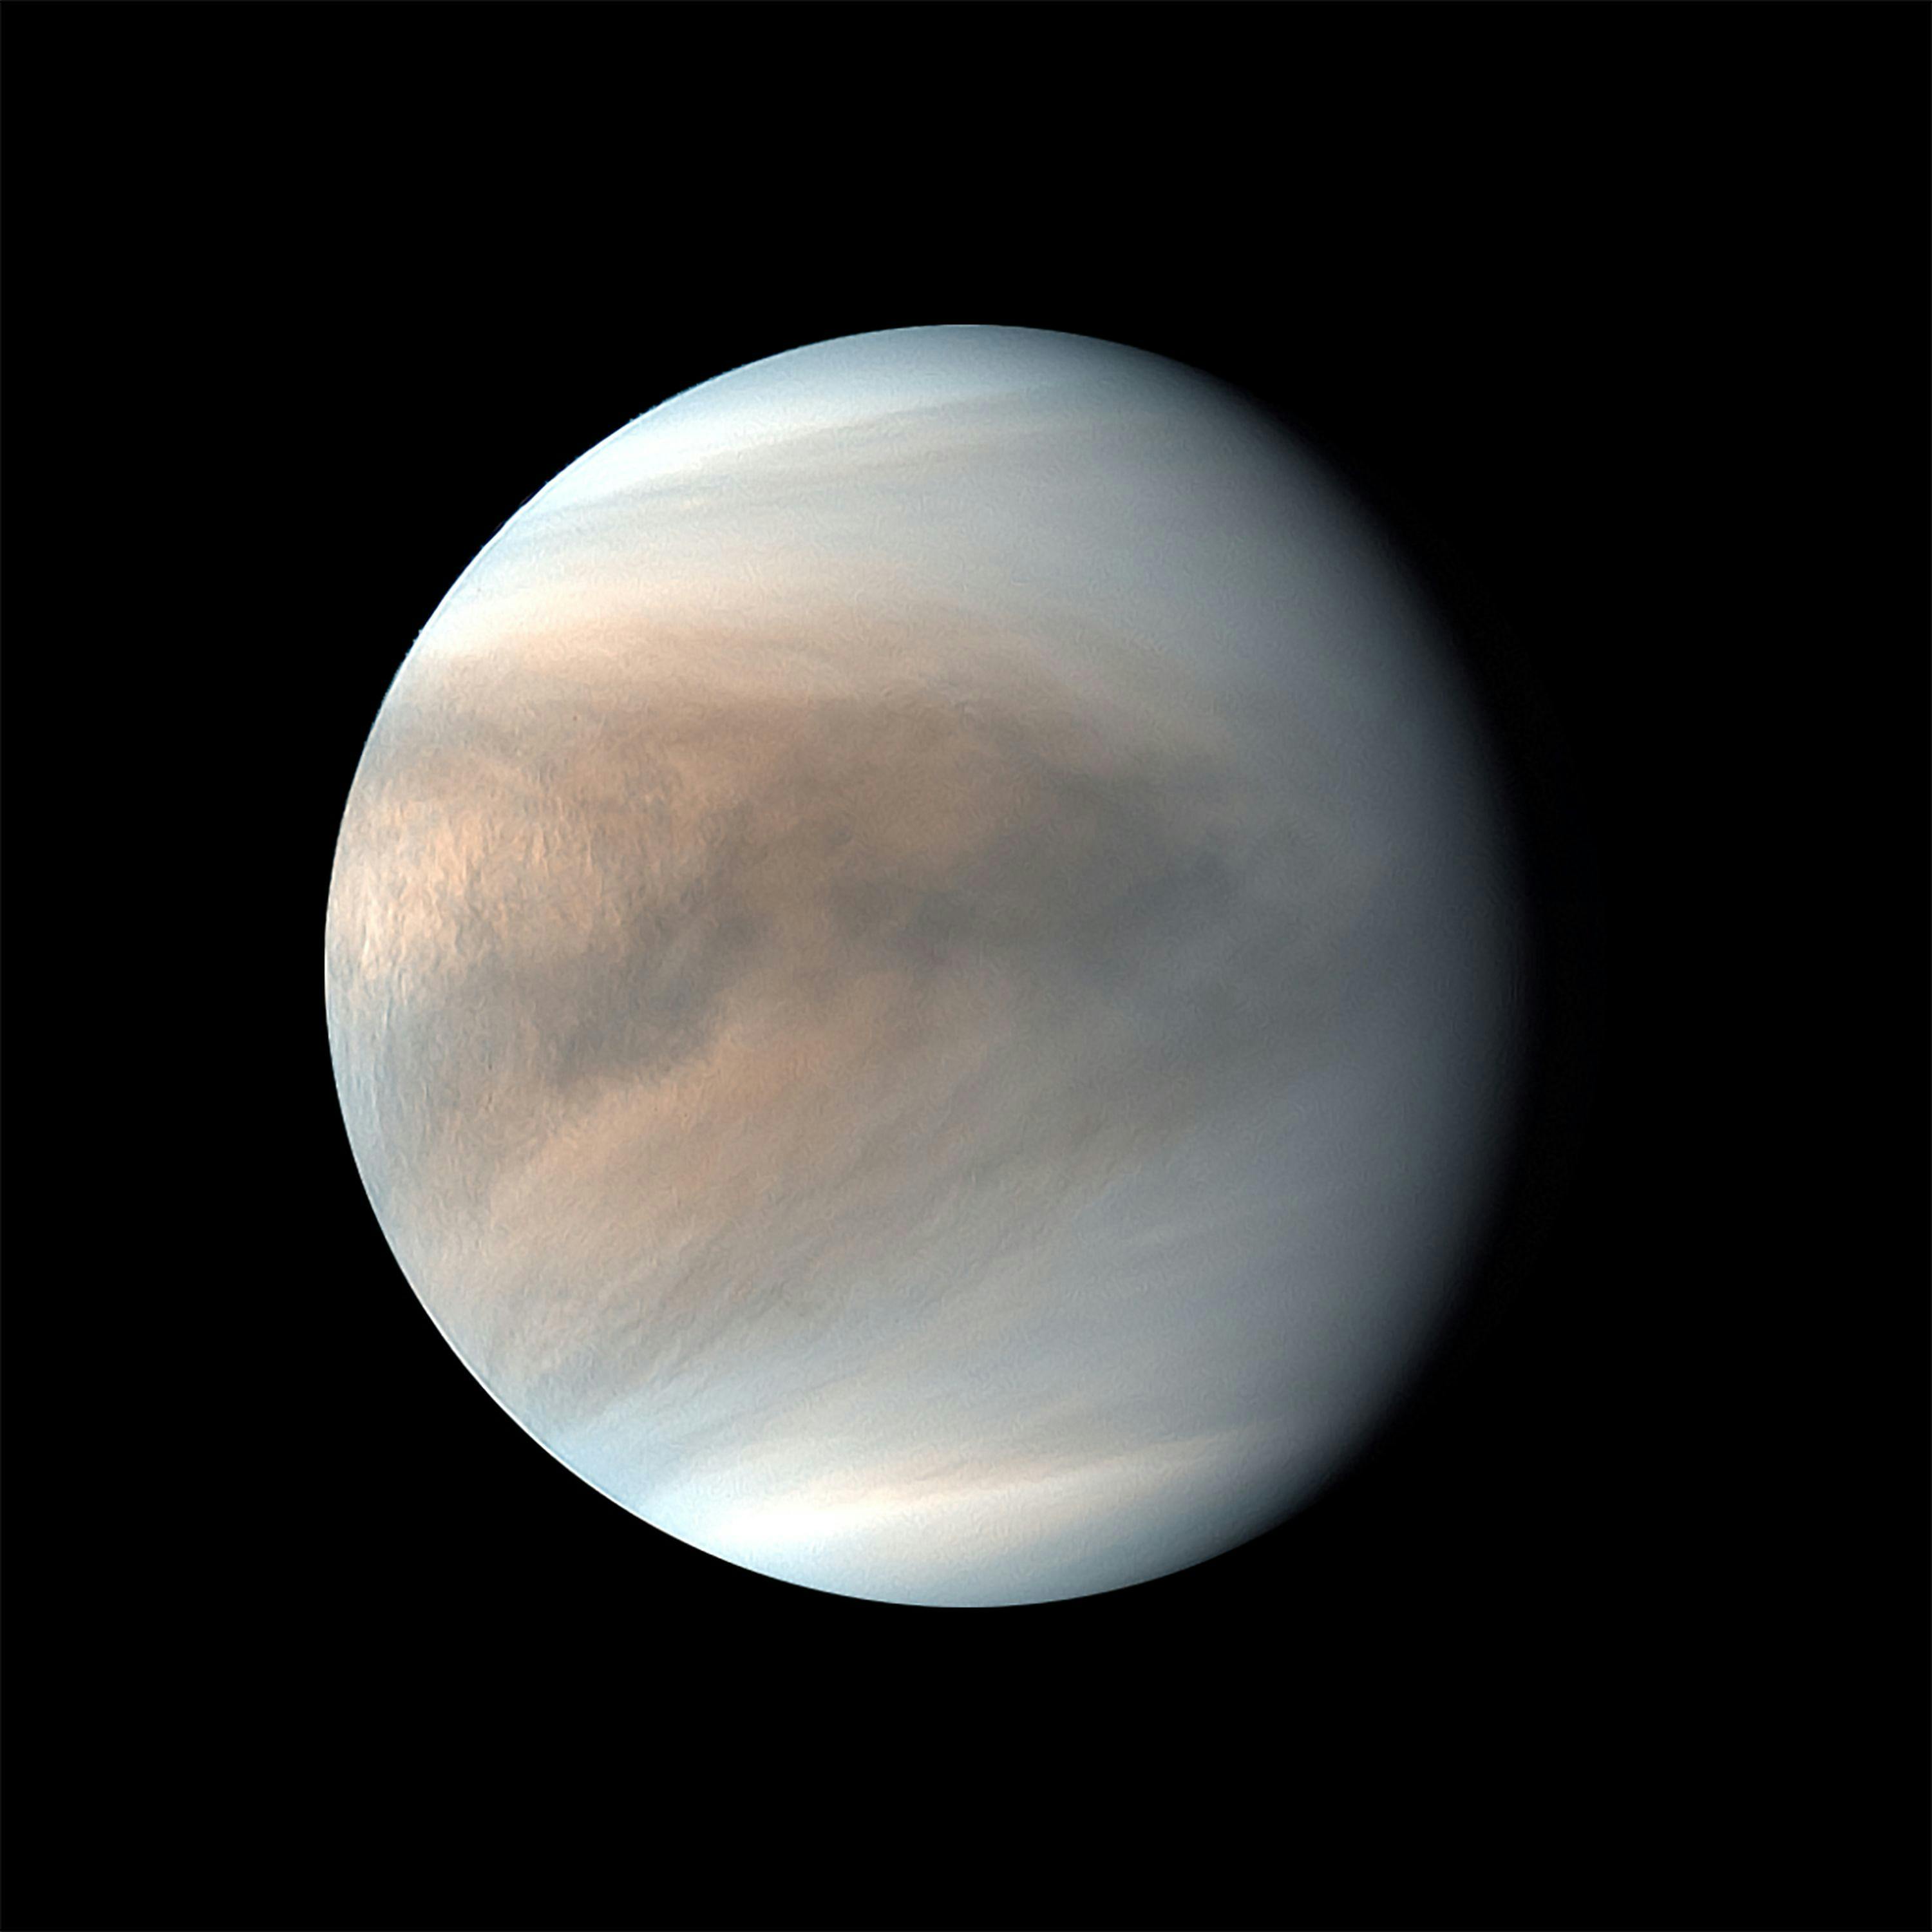 Venus special: farewell to the evening star